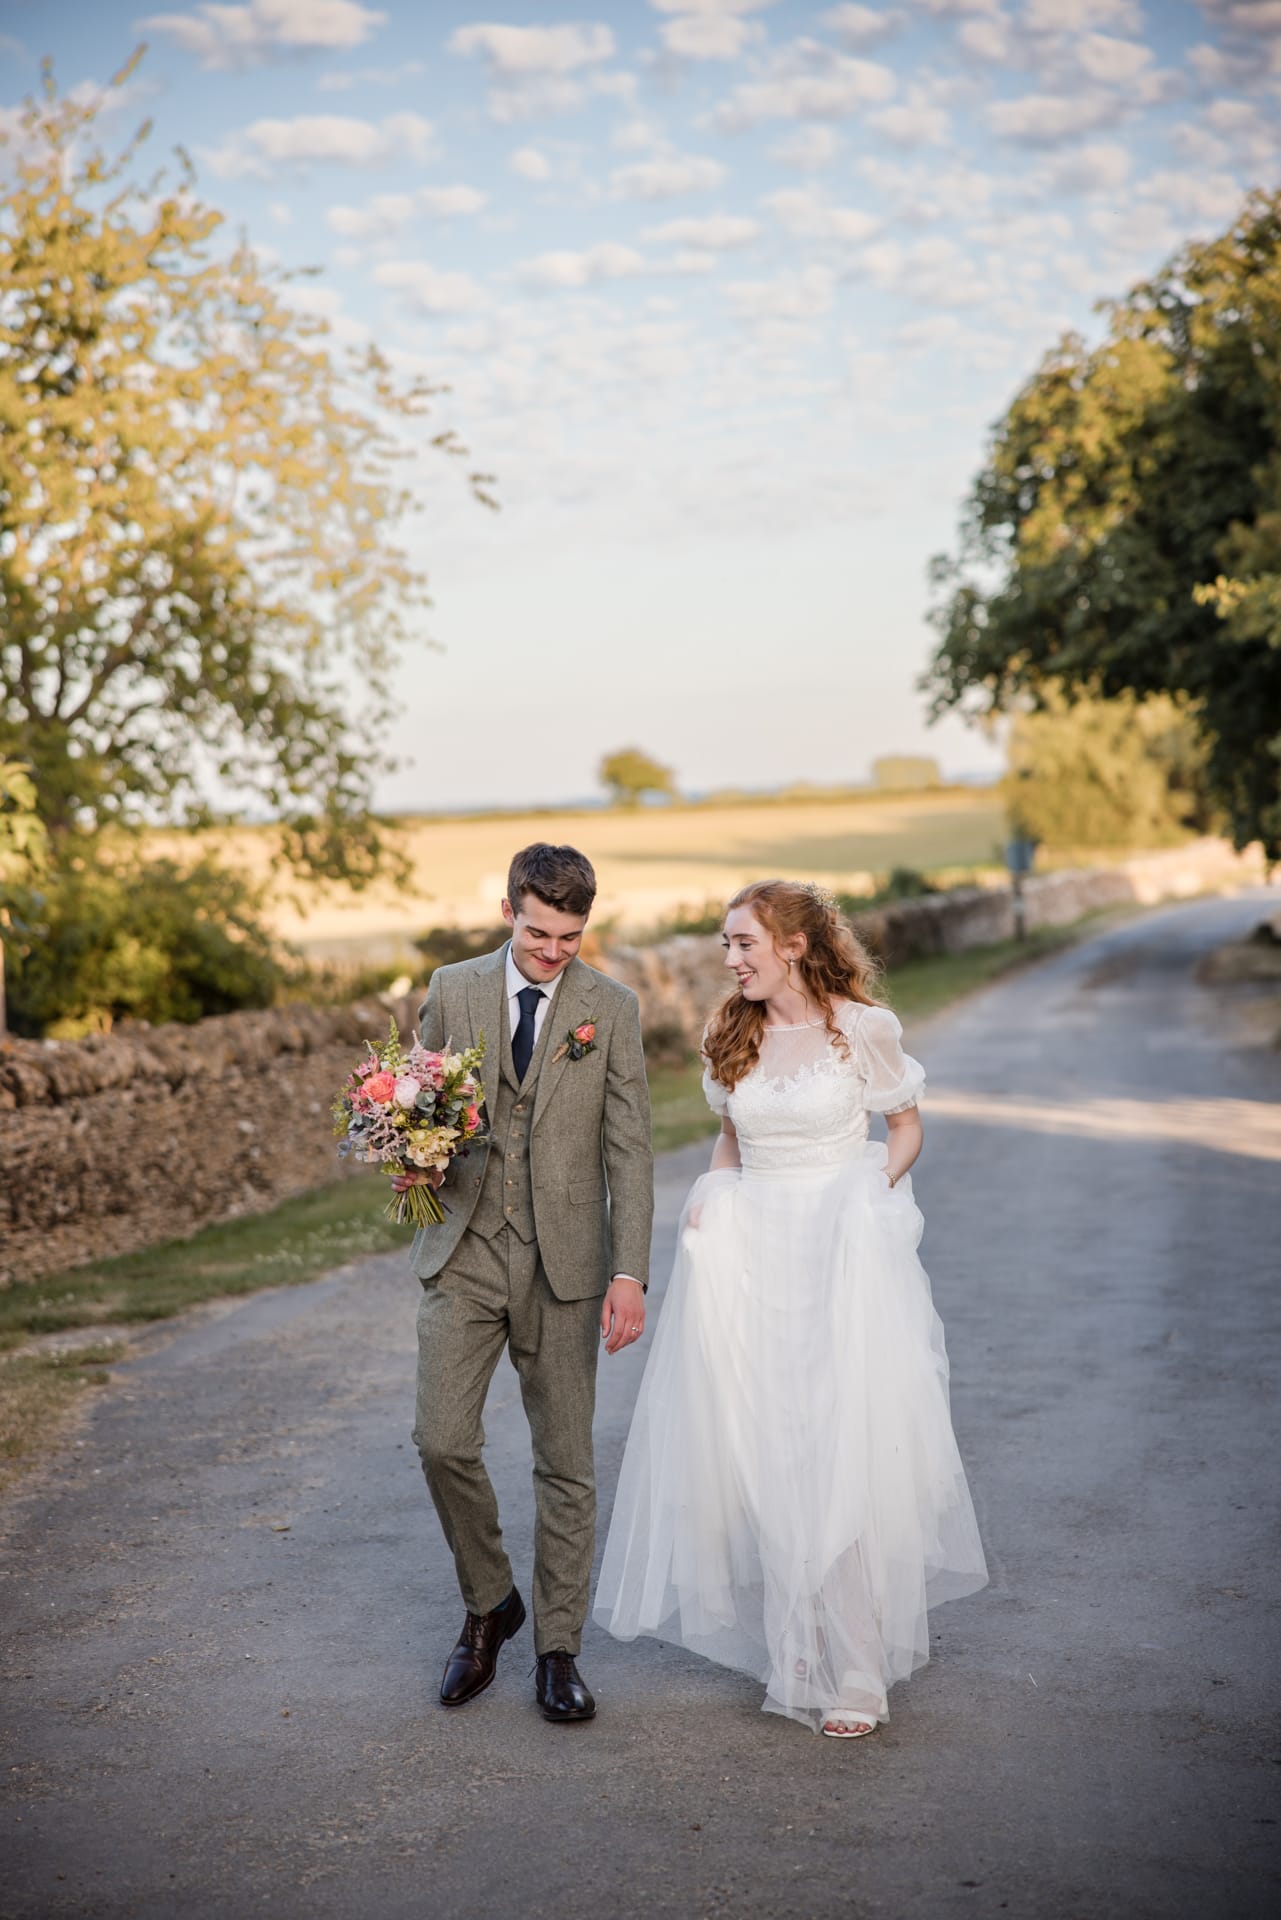 Bride and Groom walking down the drive during sunset at Oxleaze Barn